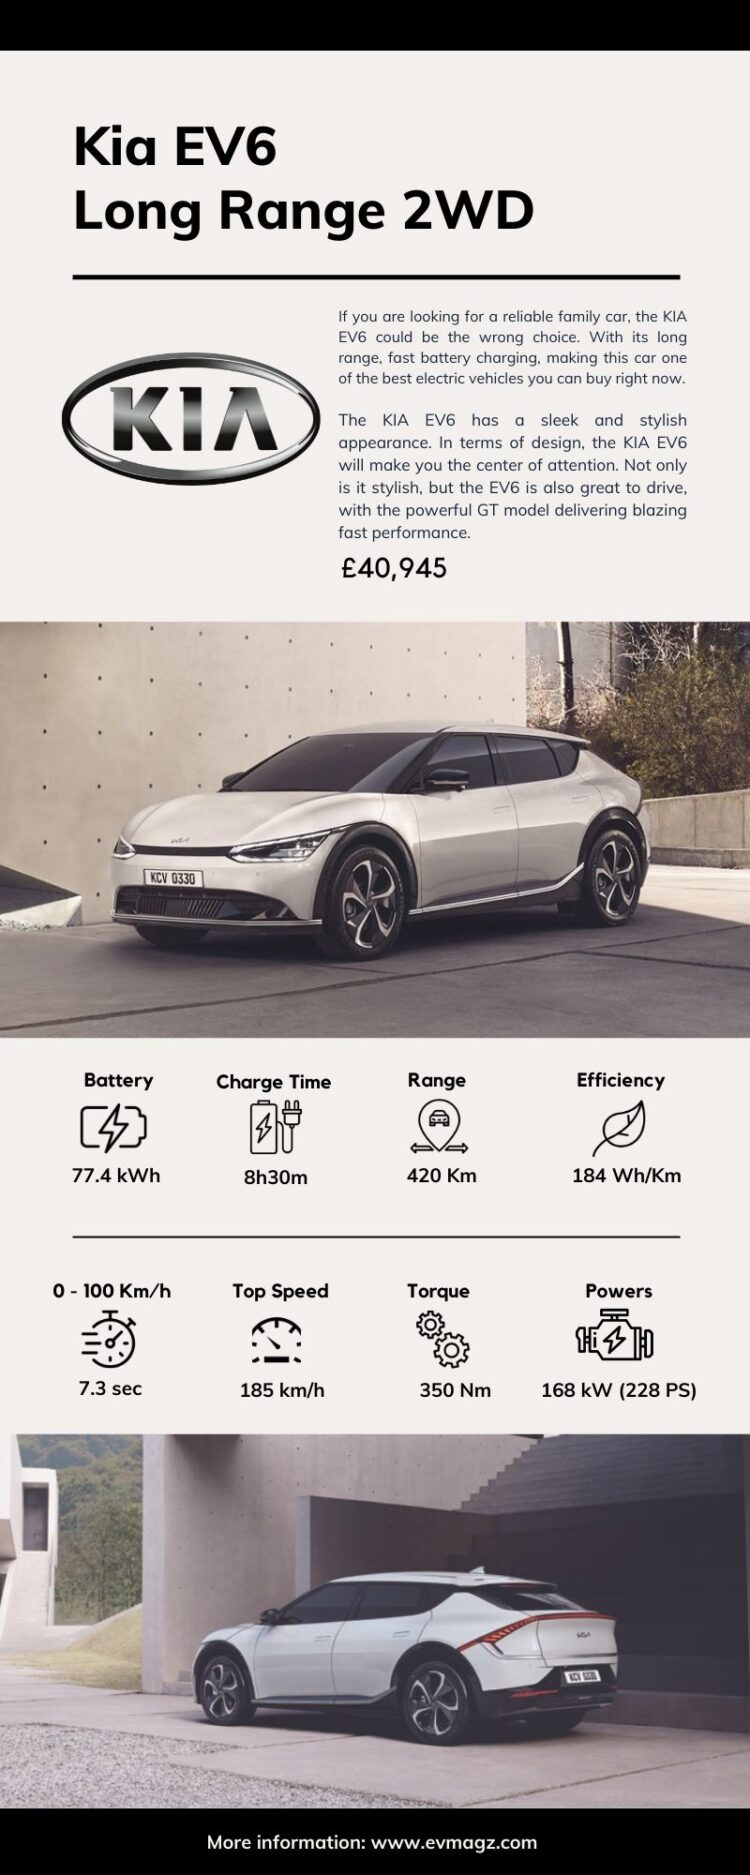 Kia EV6 Long Range 2WD Price and Specifications [Infographic]